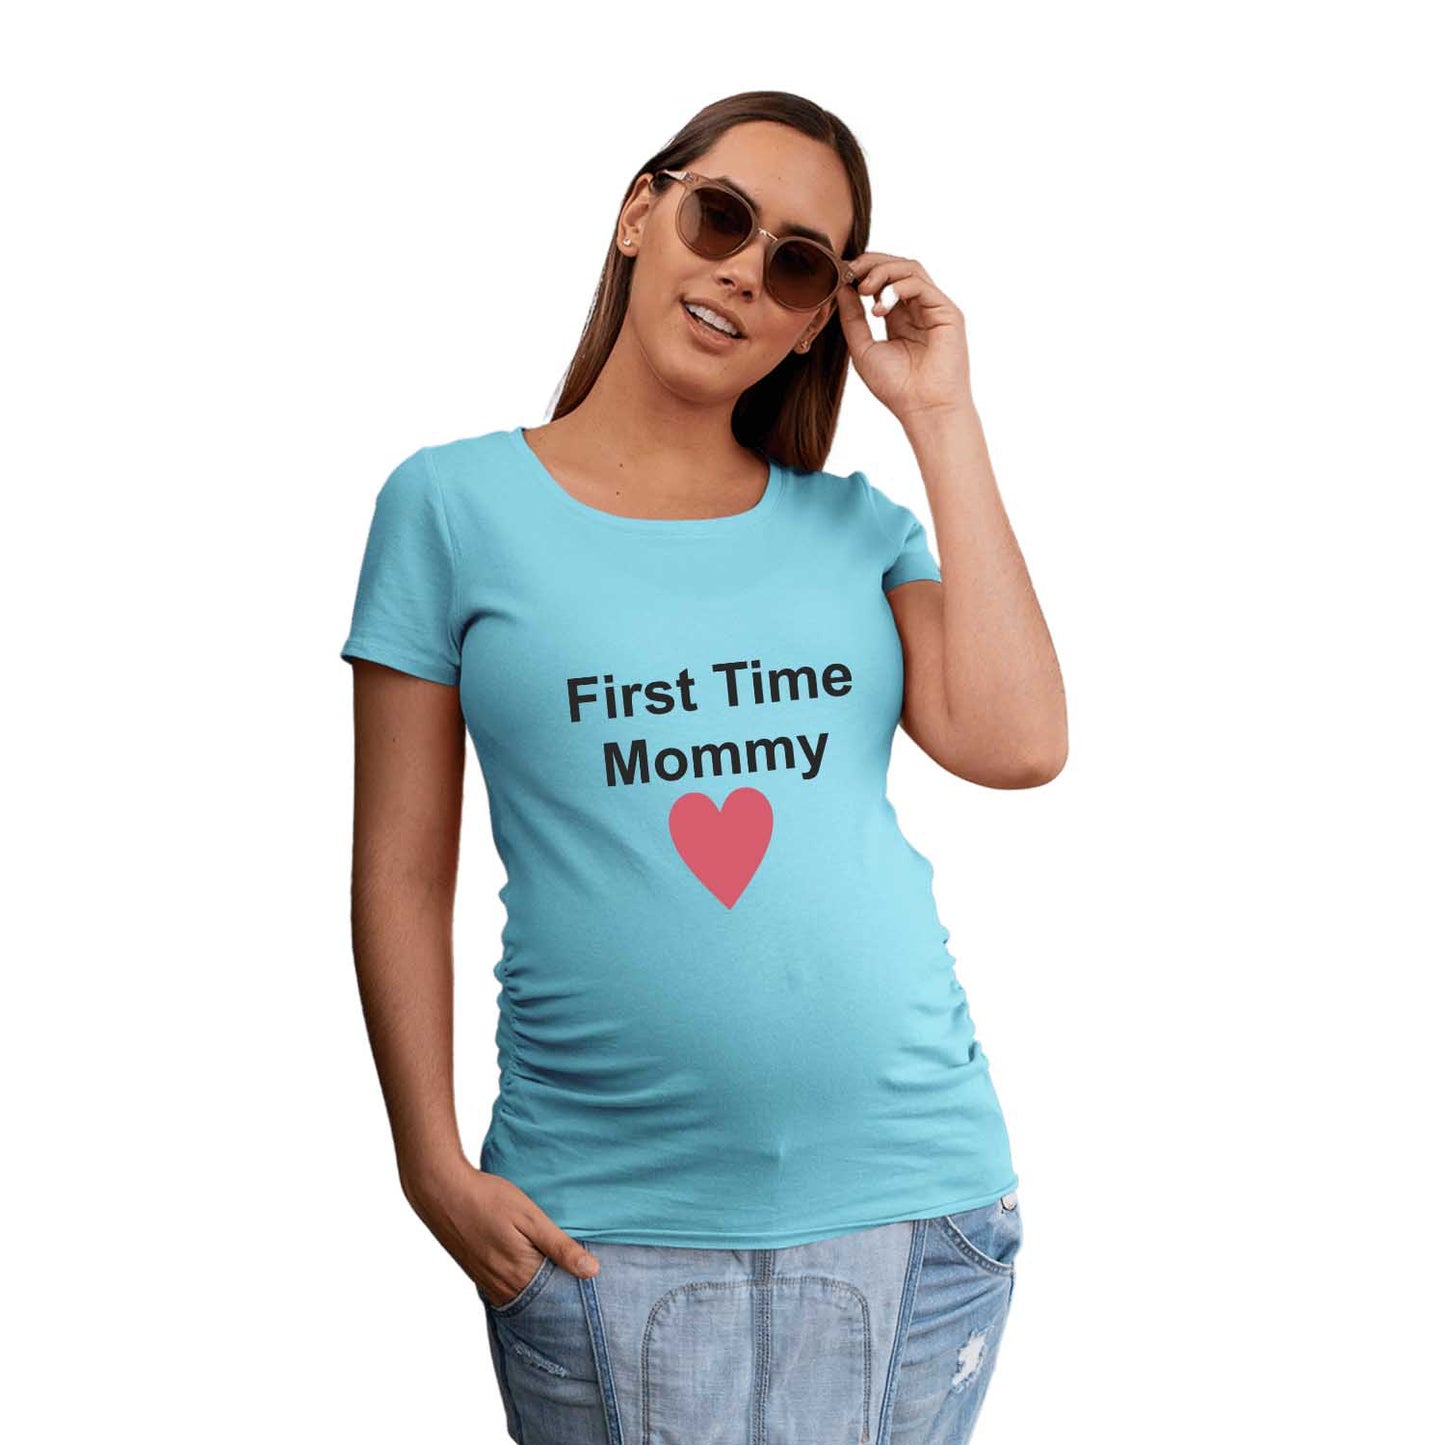 First Time Mommy ♥ Maternity Tshirt